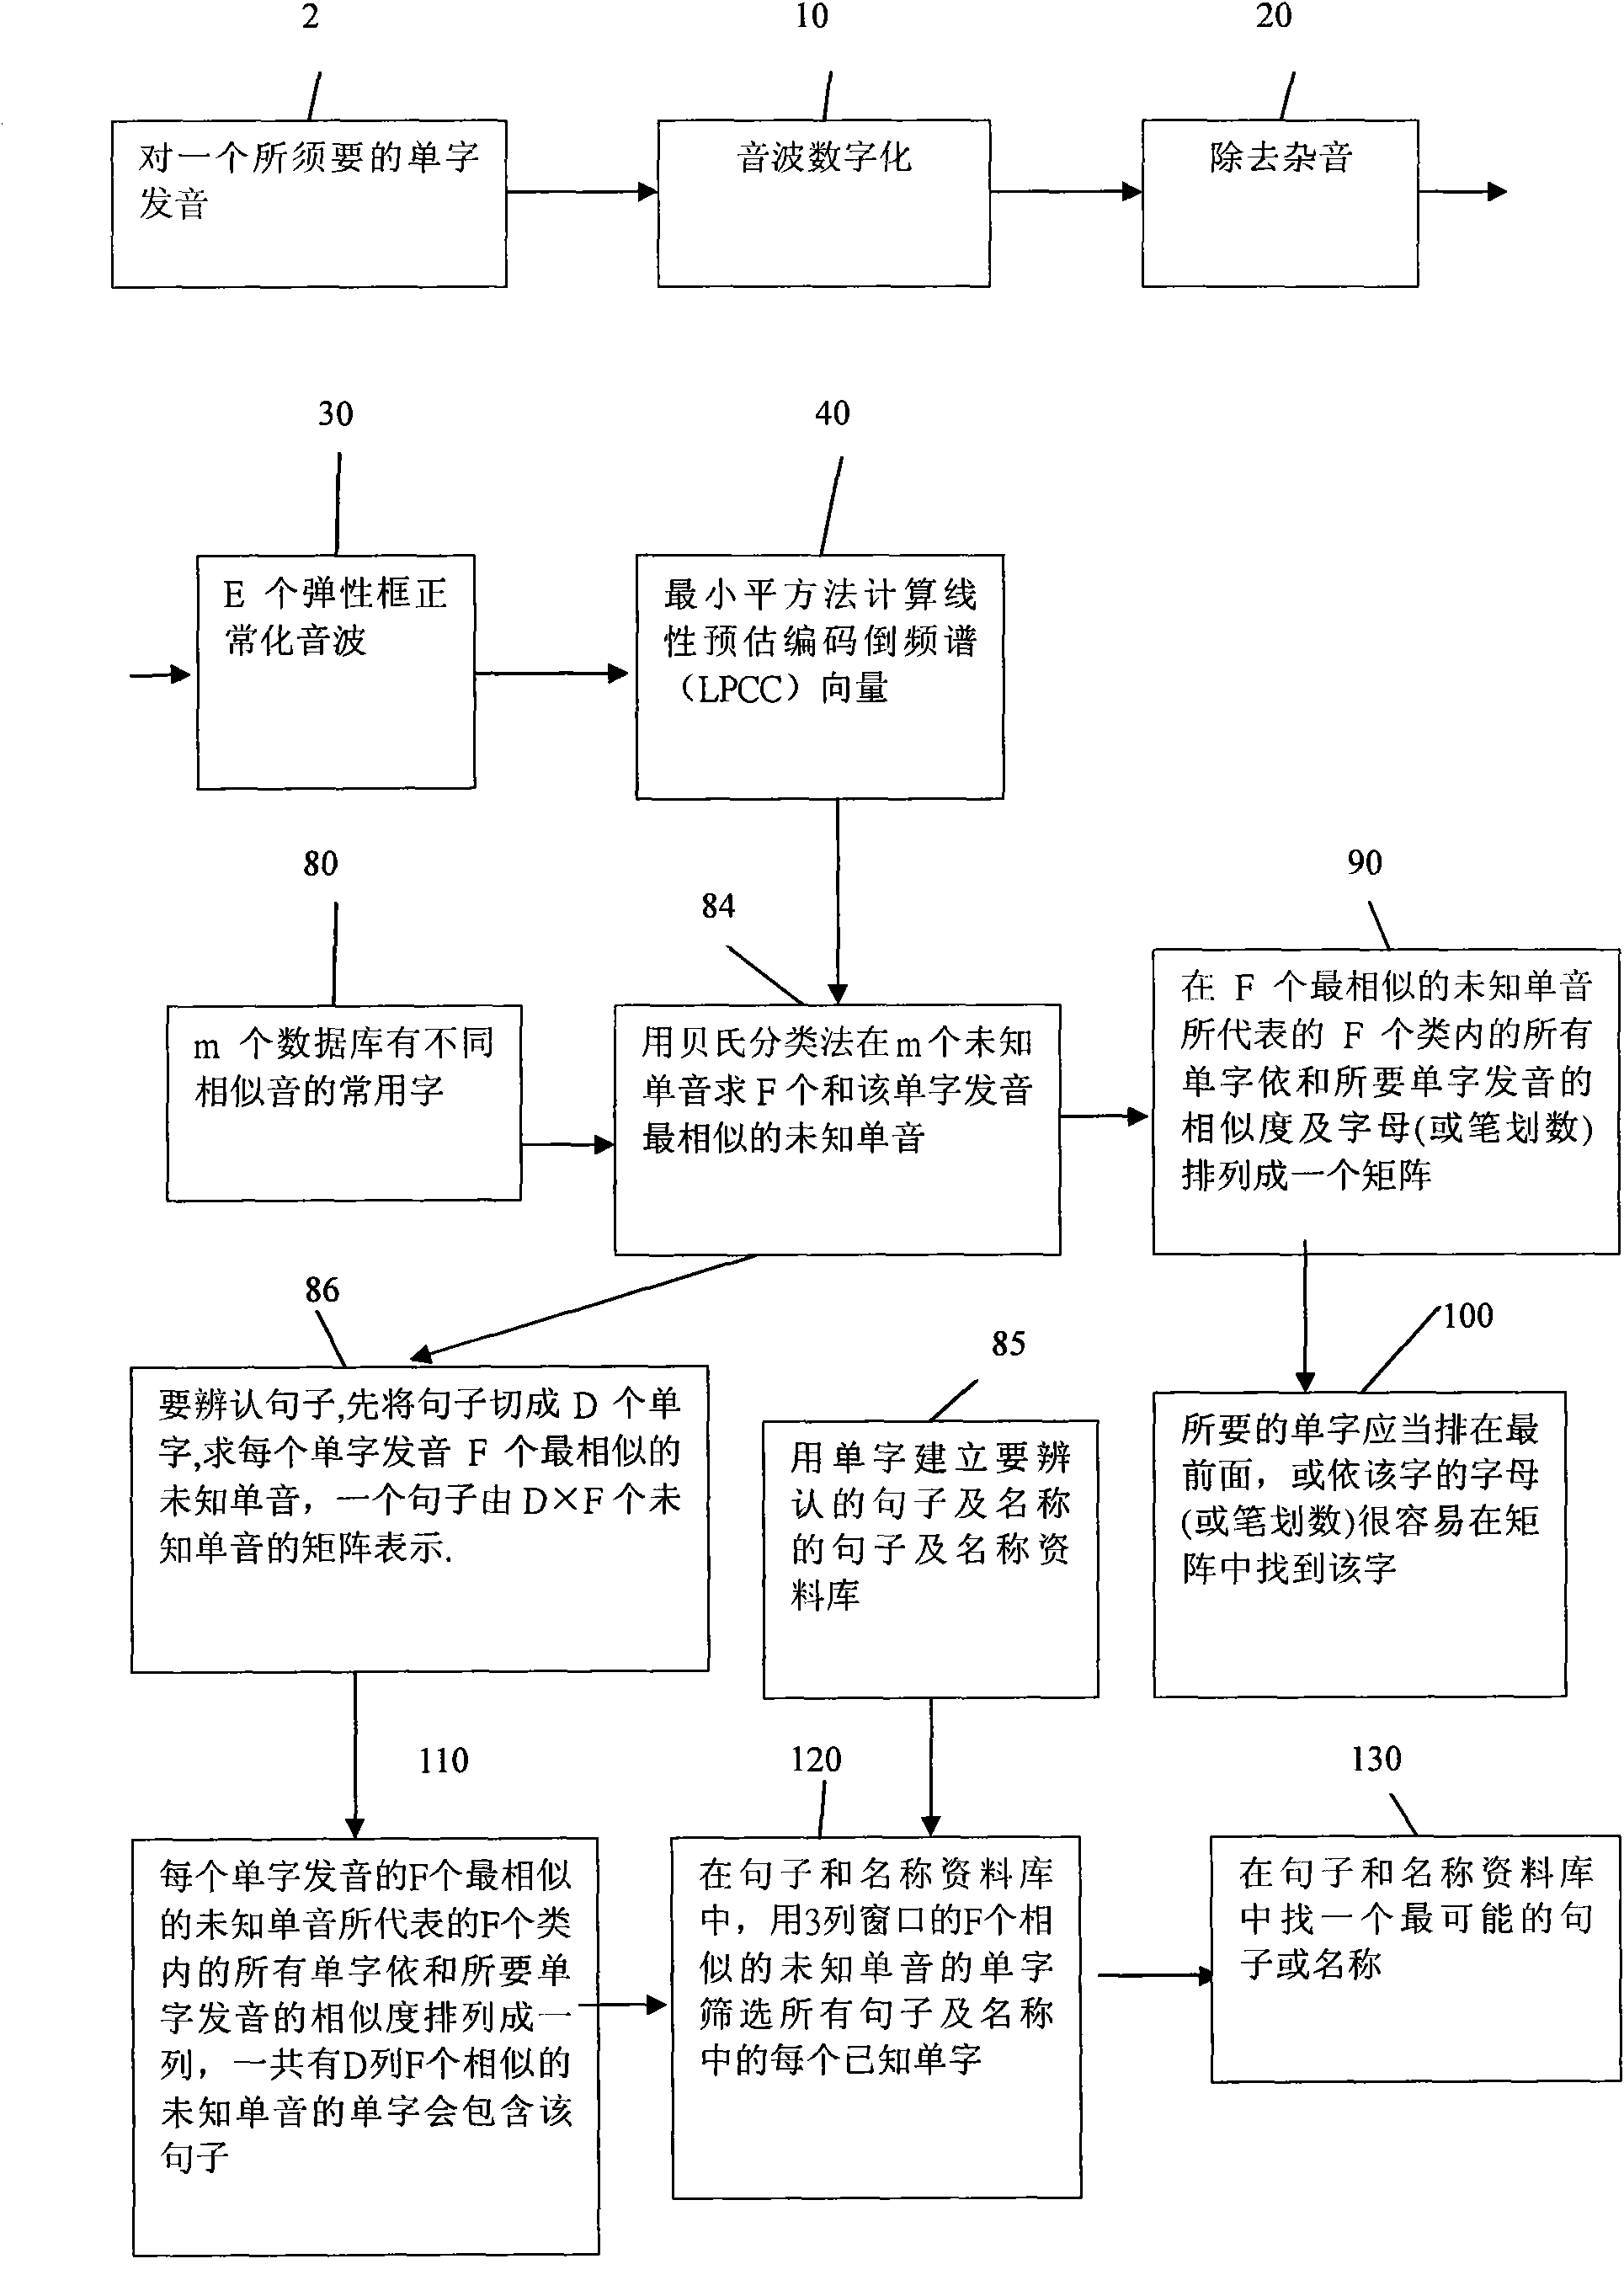 Method for identifying all languages by voice and inputting individual characters by voice